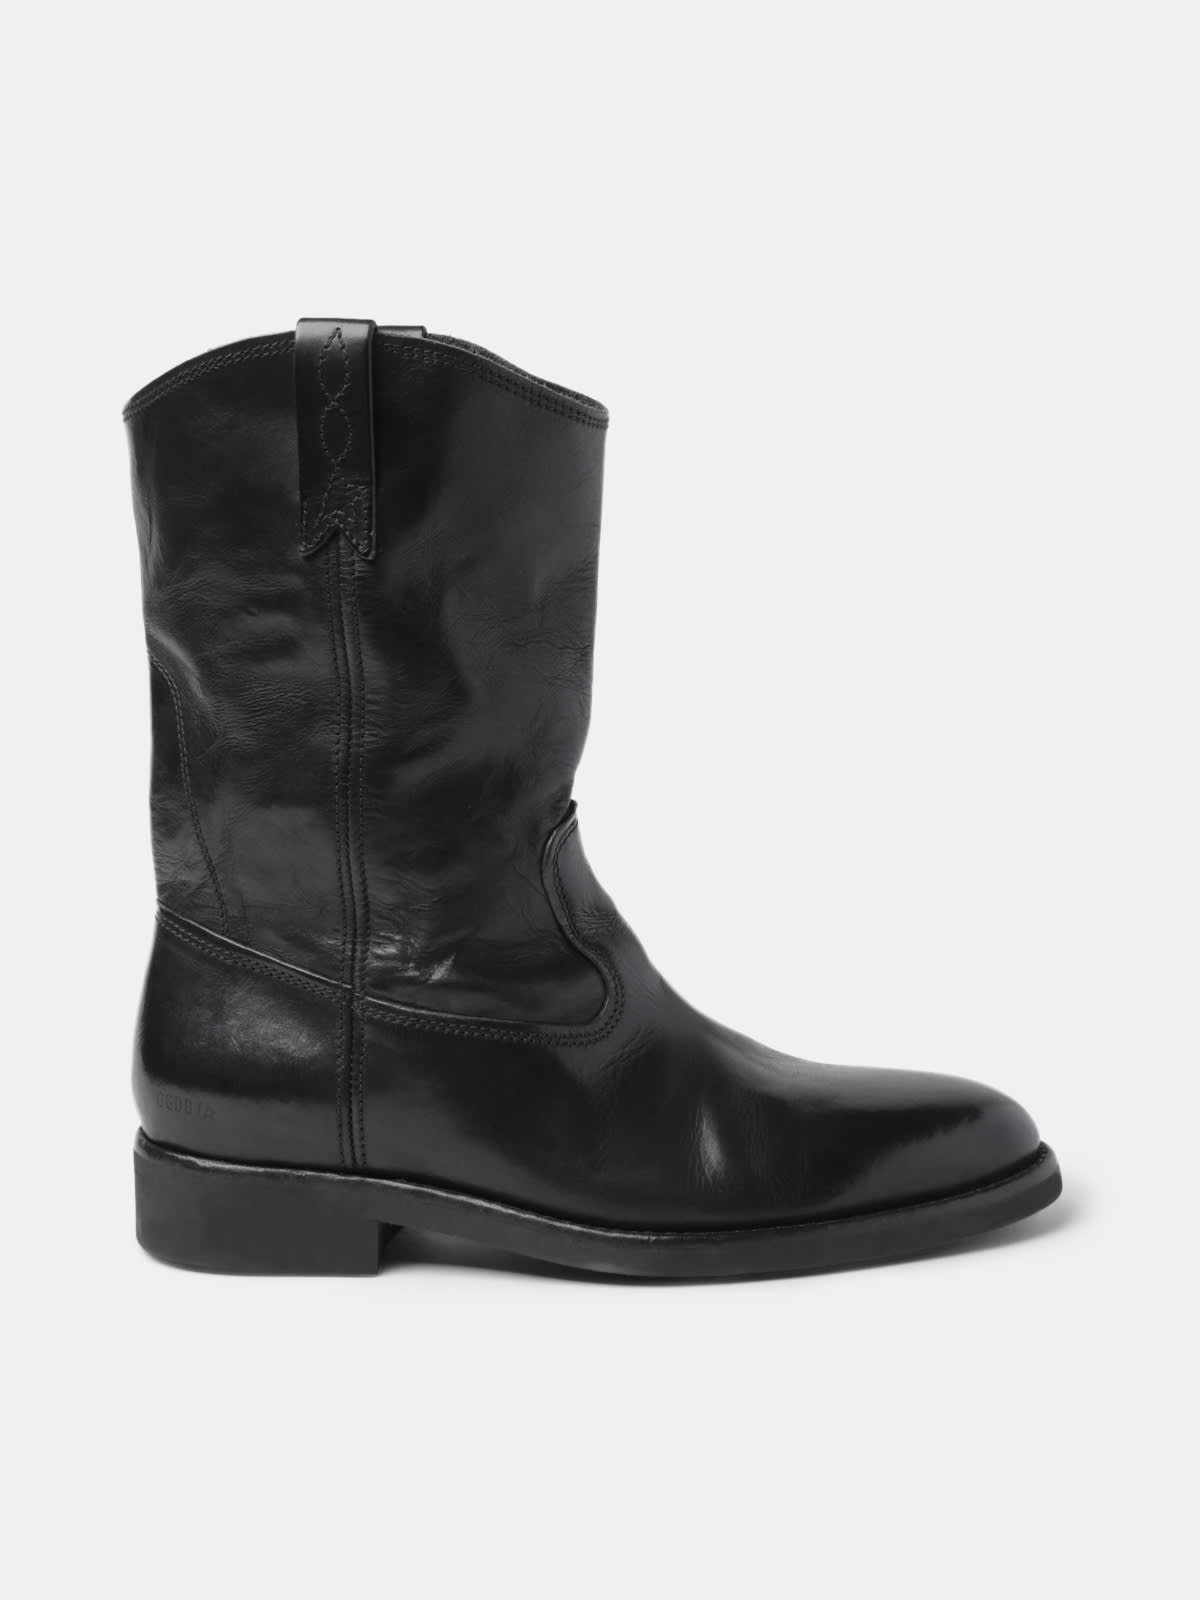 Biker boots in glossy black leather | Golden Goose